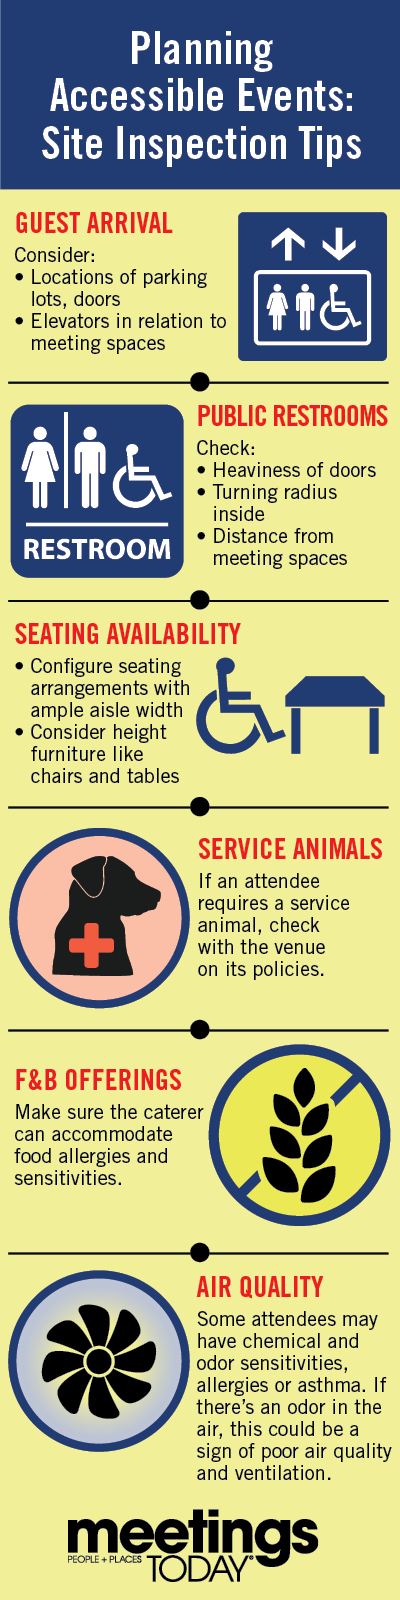 Planning Accessible Events Infographic: Site Inspection Tips